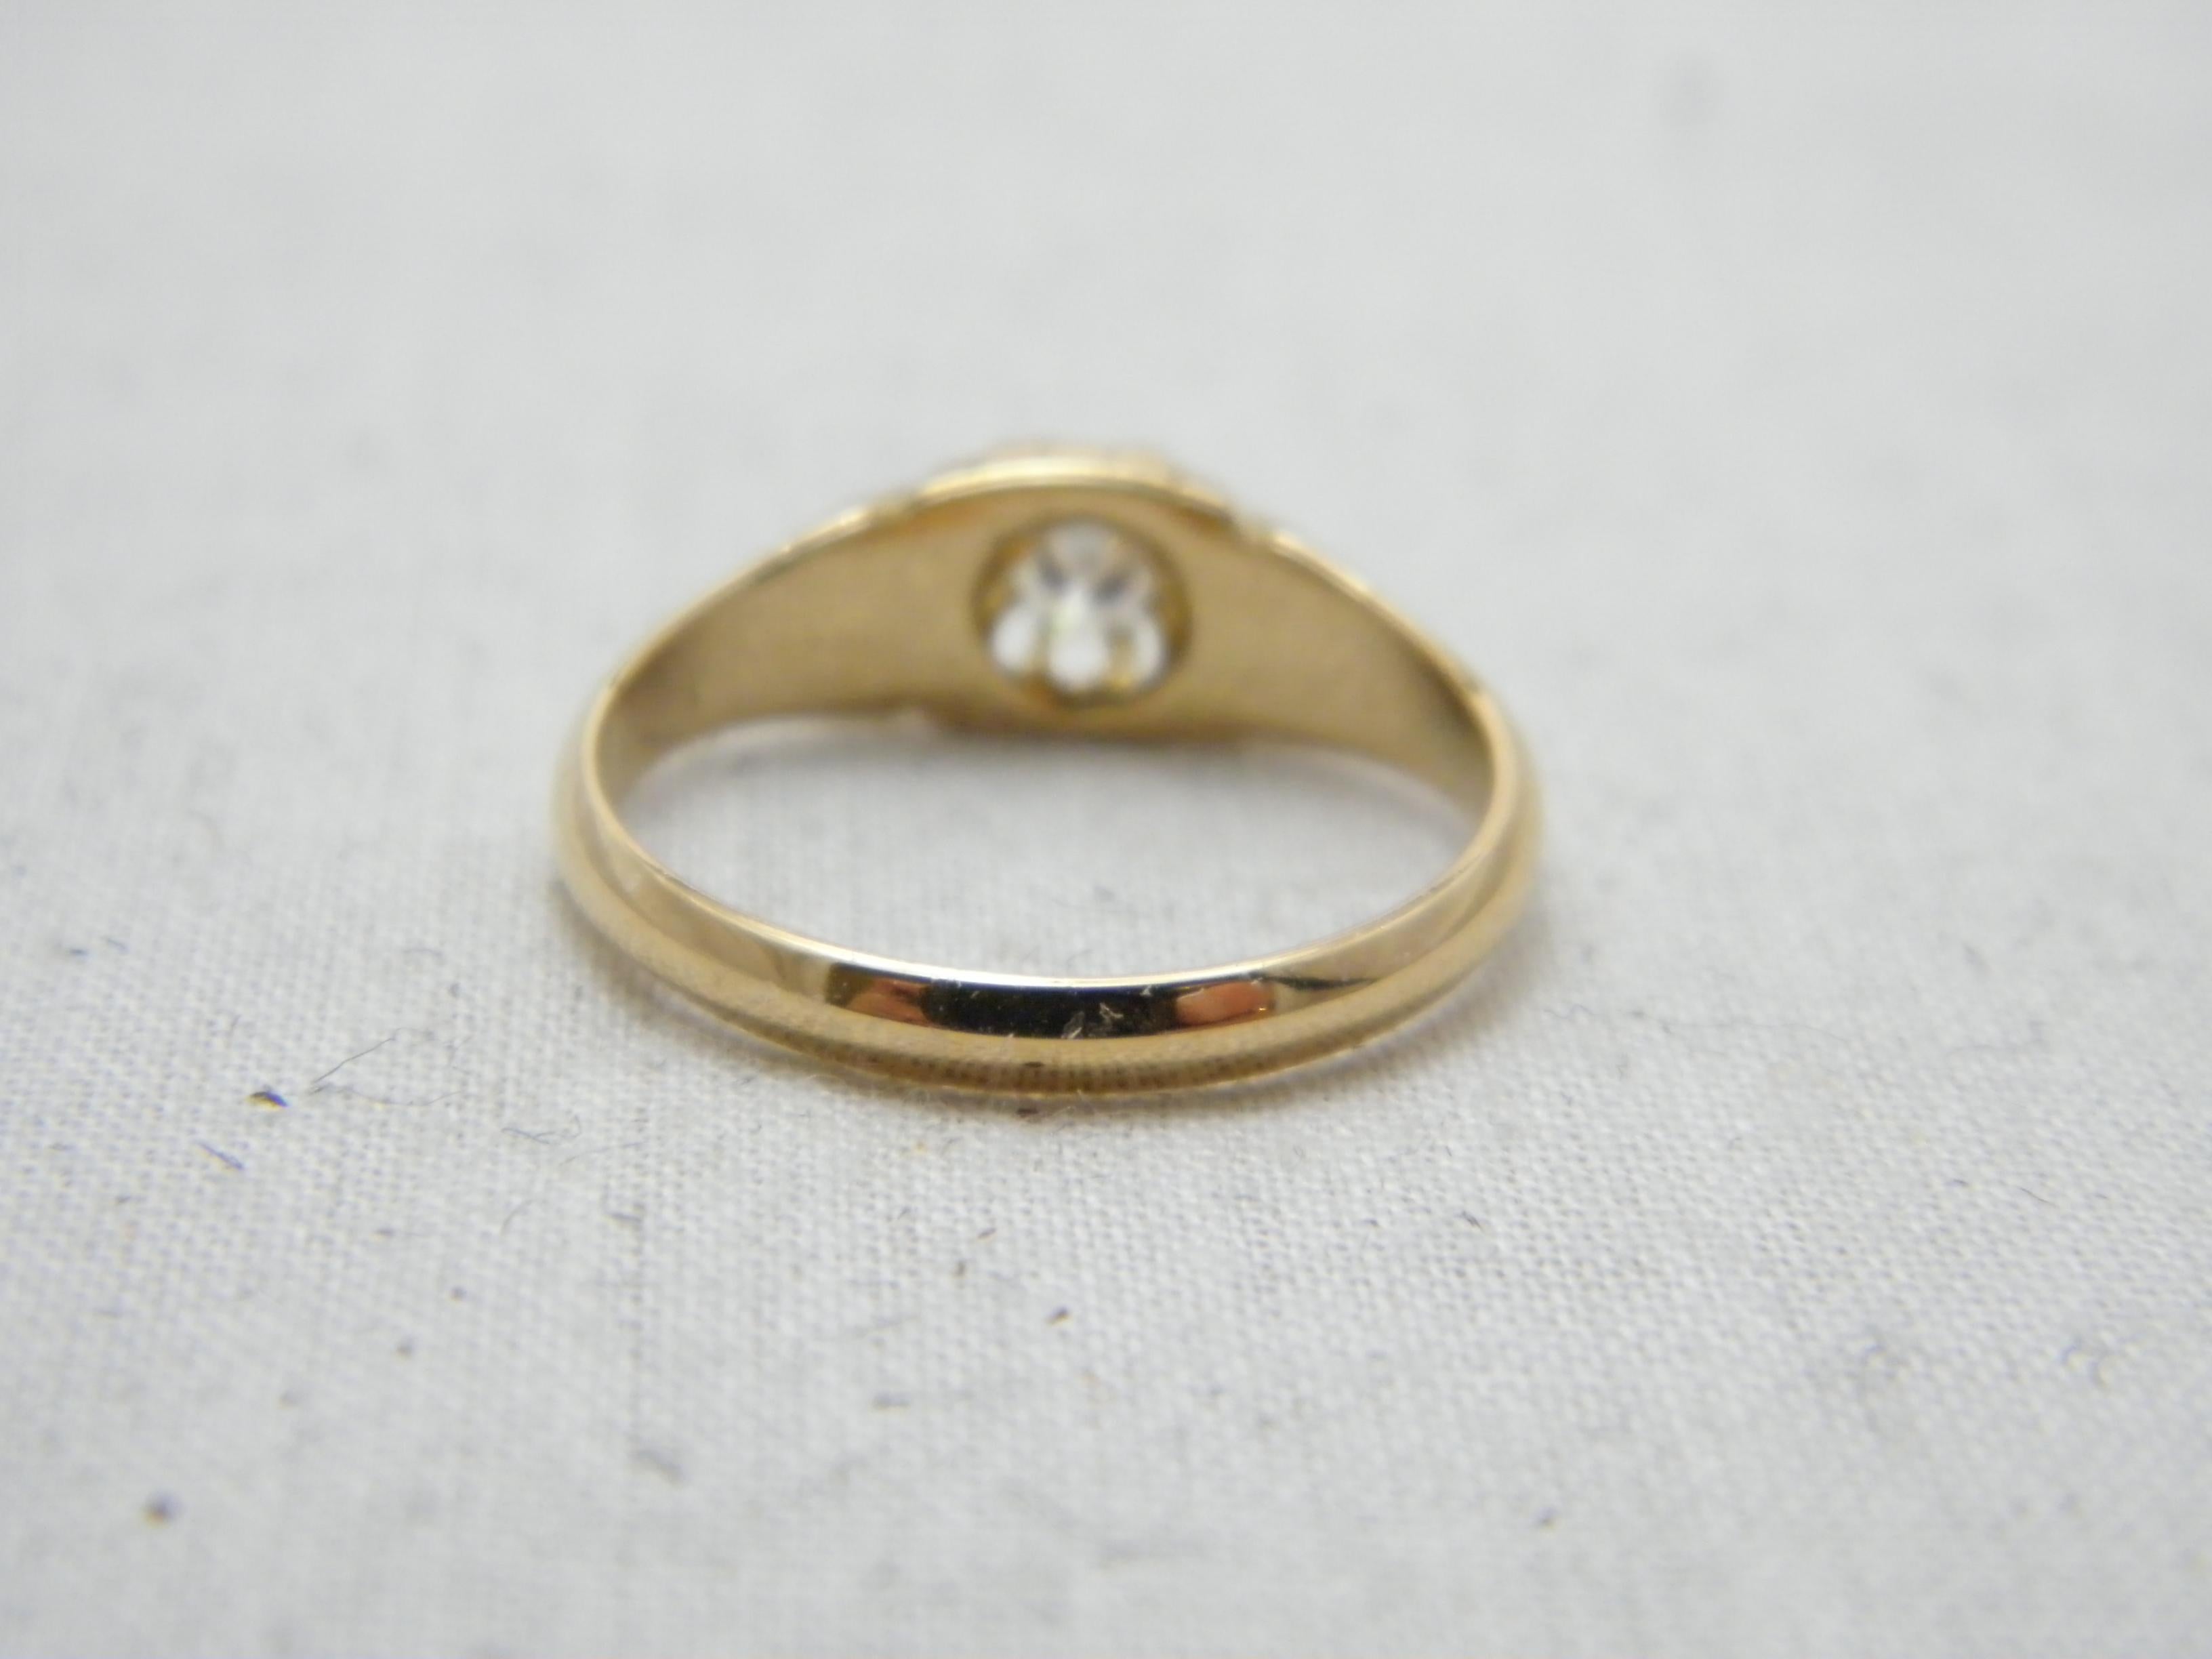 Round Cut Antique 18ct Gold 0.33Cttw Diamond Solitaire Gypsy Ring Size N 6.75 750 Purity For Sale